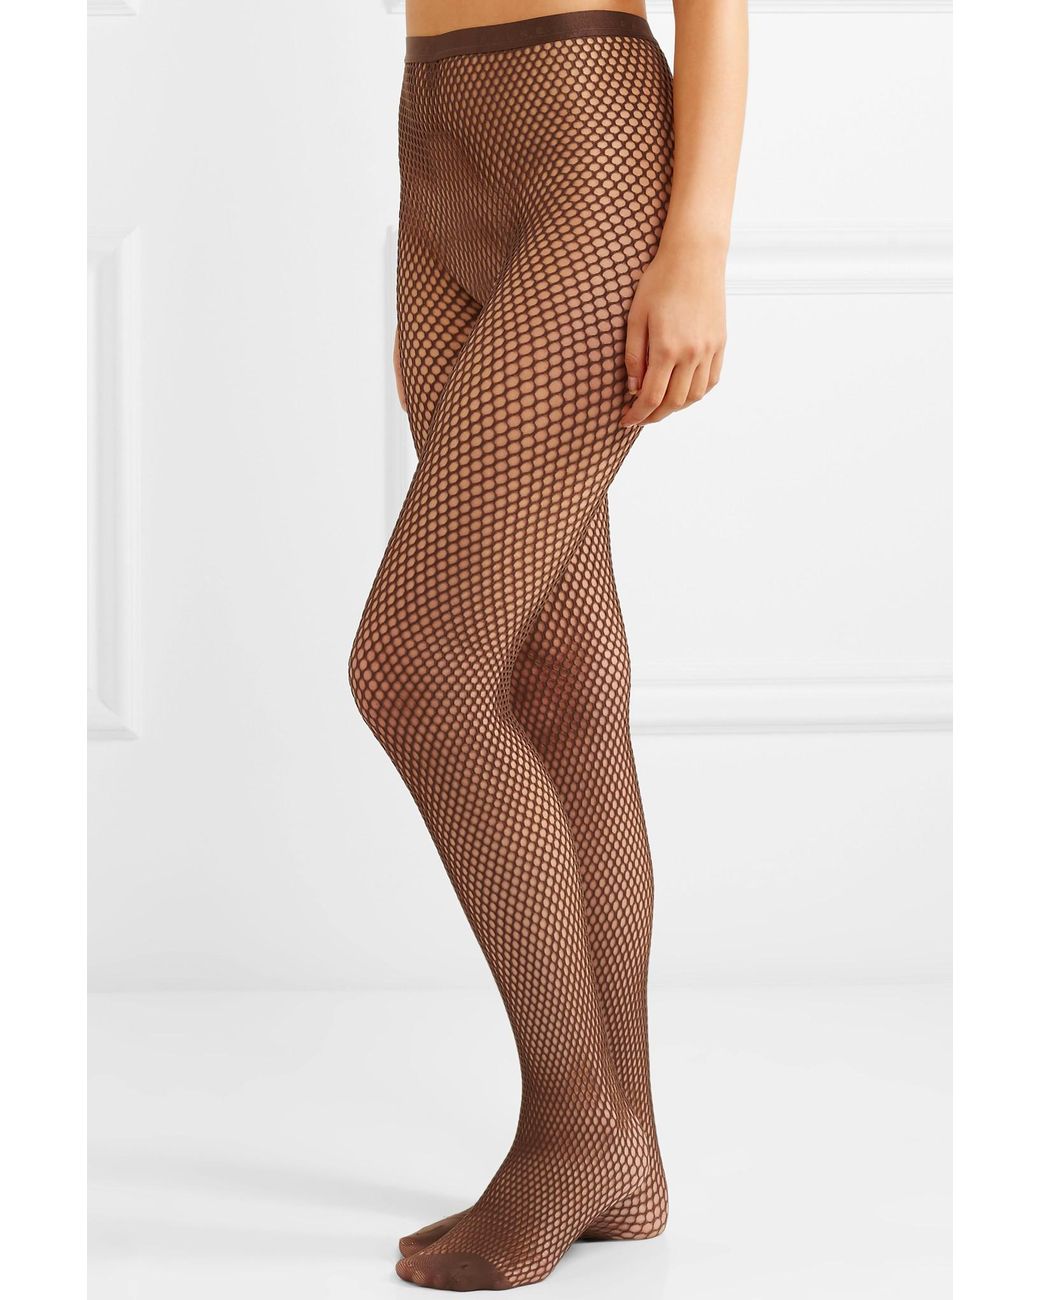 FALKE Fishnet Tights Chocolate in Brown